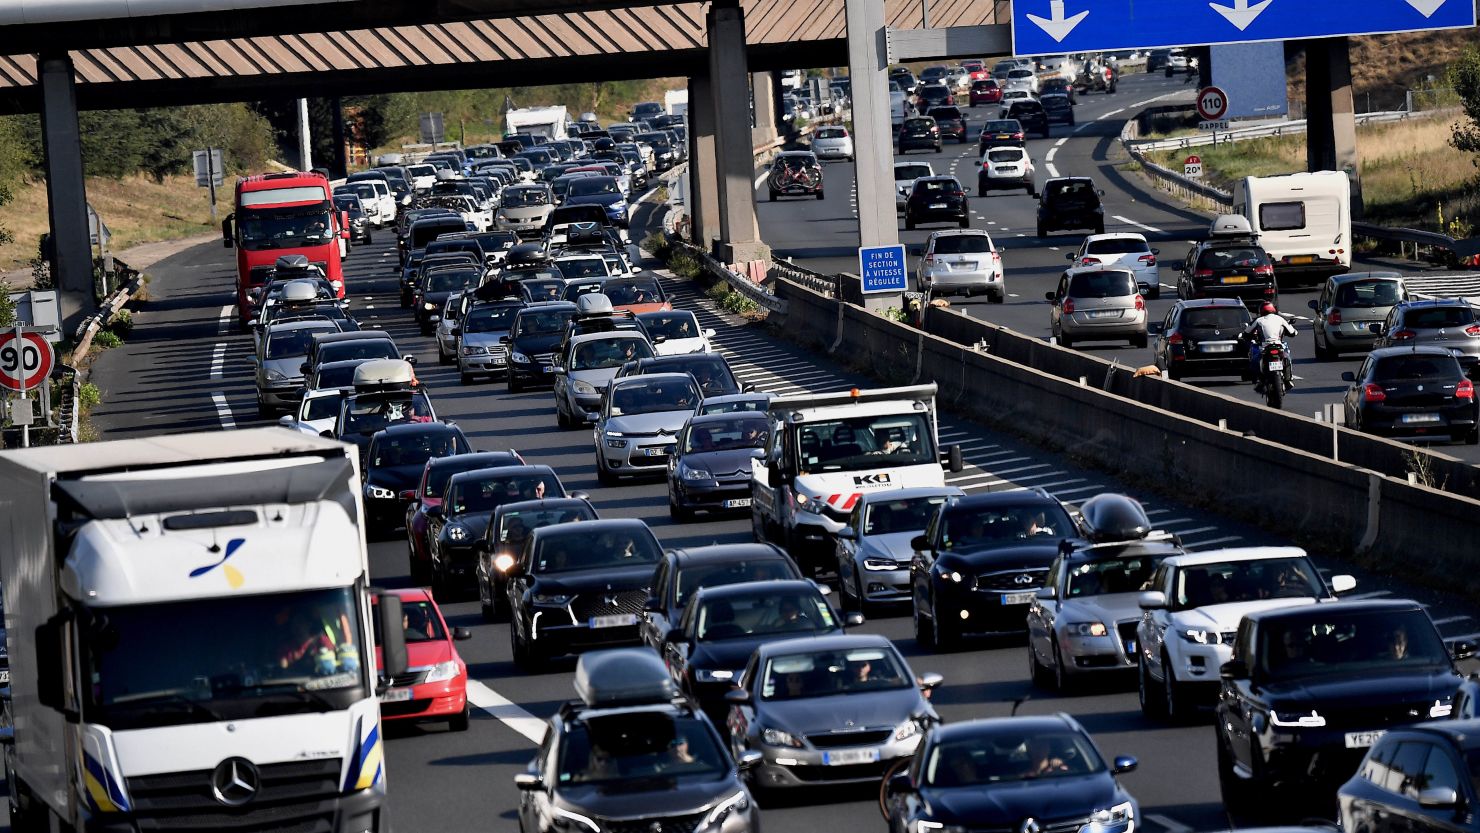 The weekends when August and July meet regularly see France gridlocked by traffic tailbacks amounting to hundreds of kilometers.  
